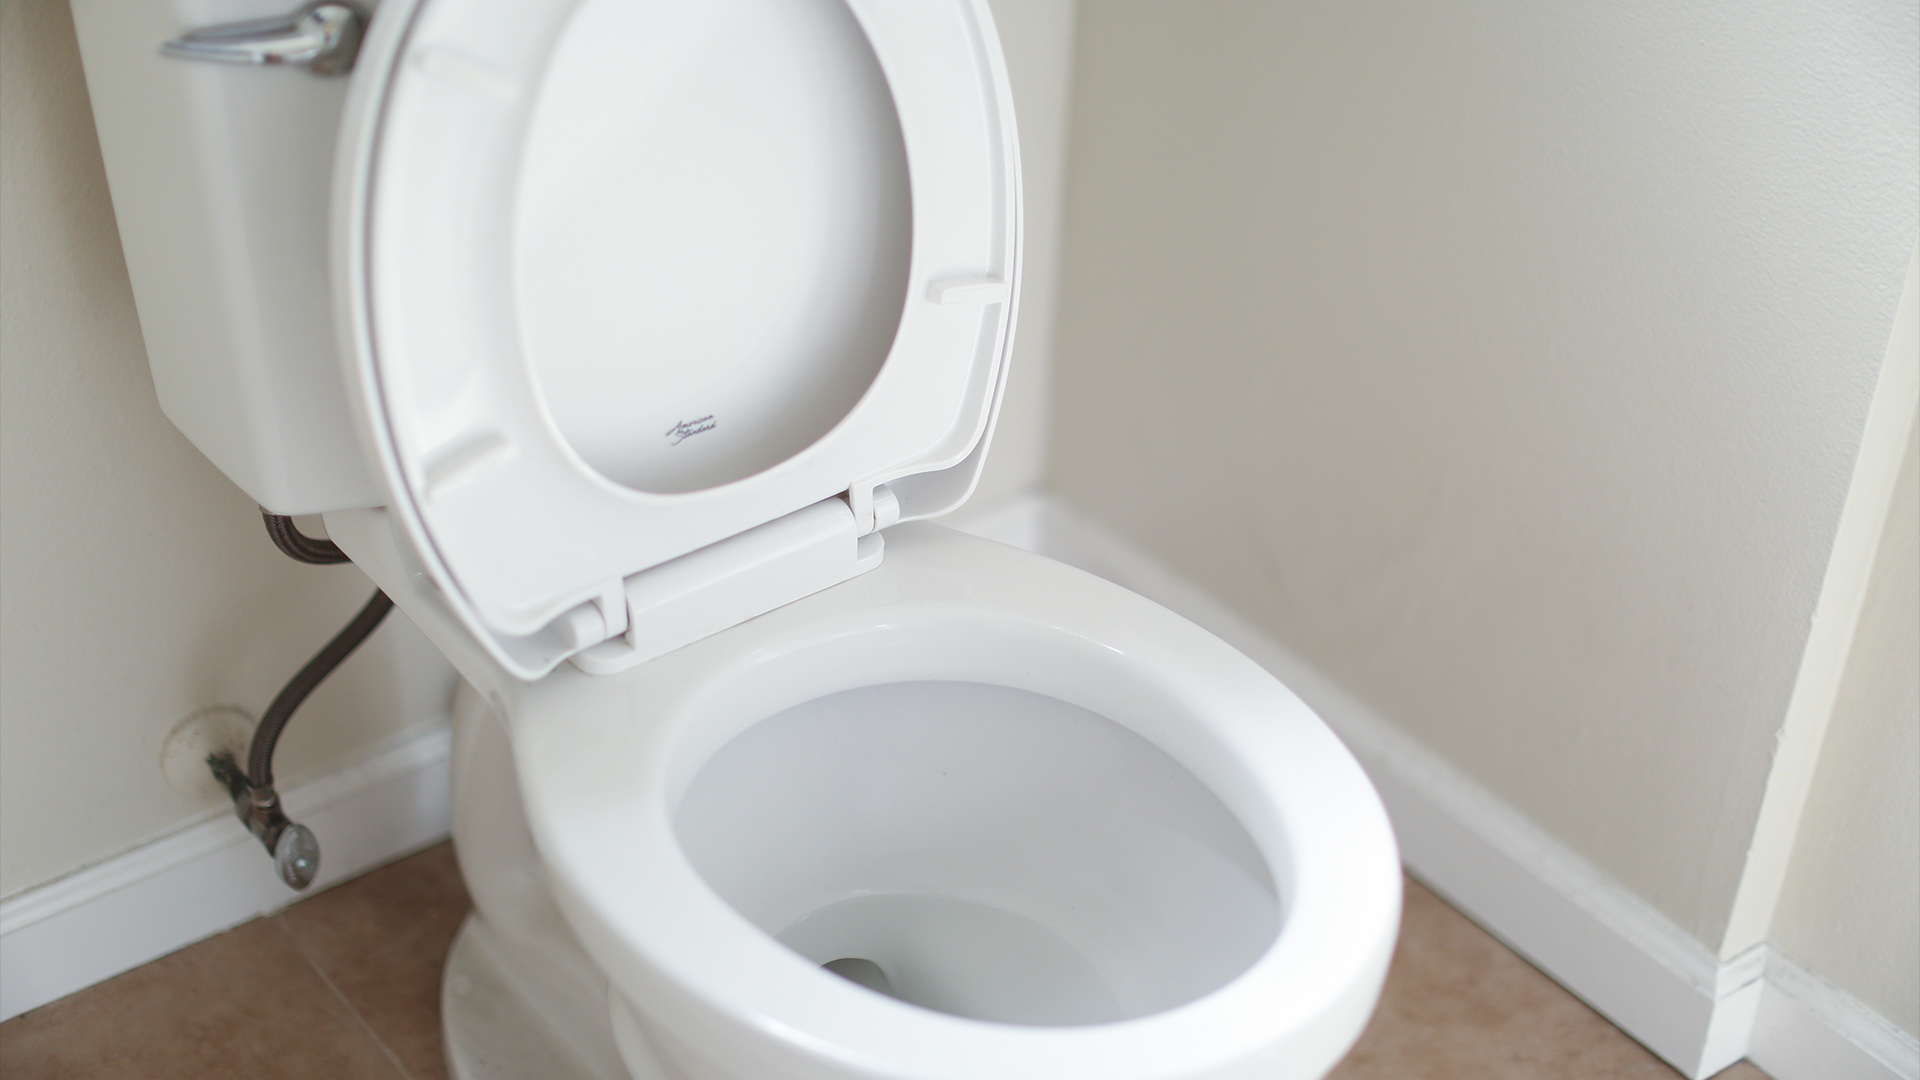 Can I Flush My Cat's Poop Down The Toilet?